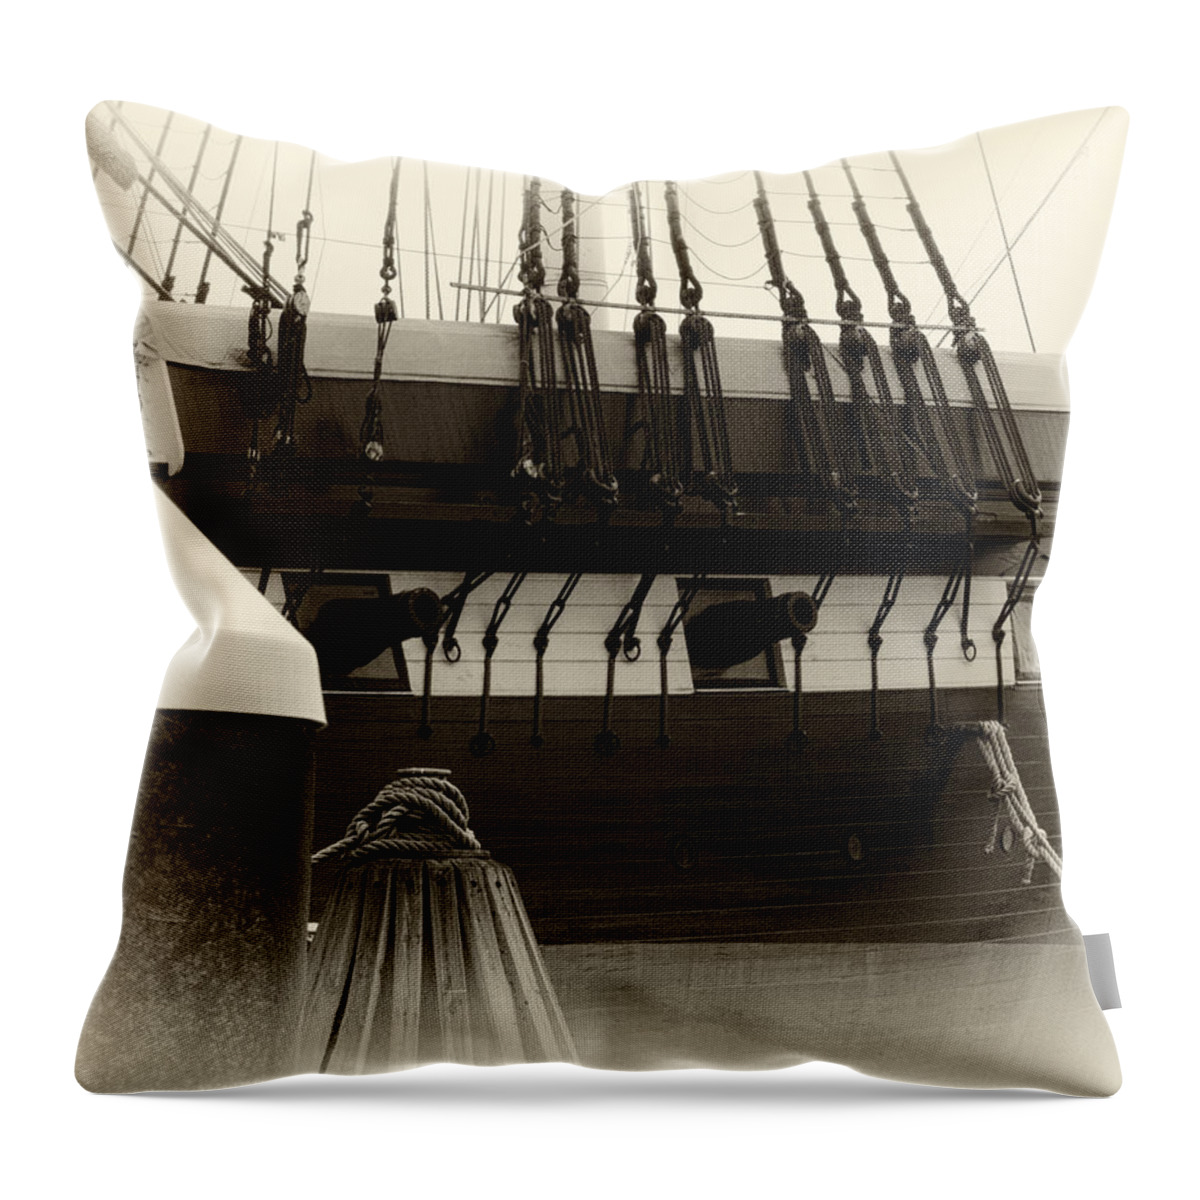 Uss Constellation Throw Pillow featuring the photograph Faded Glory by Bill Swartwout